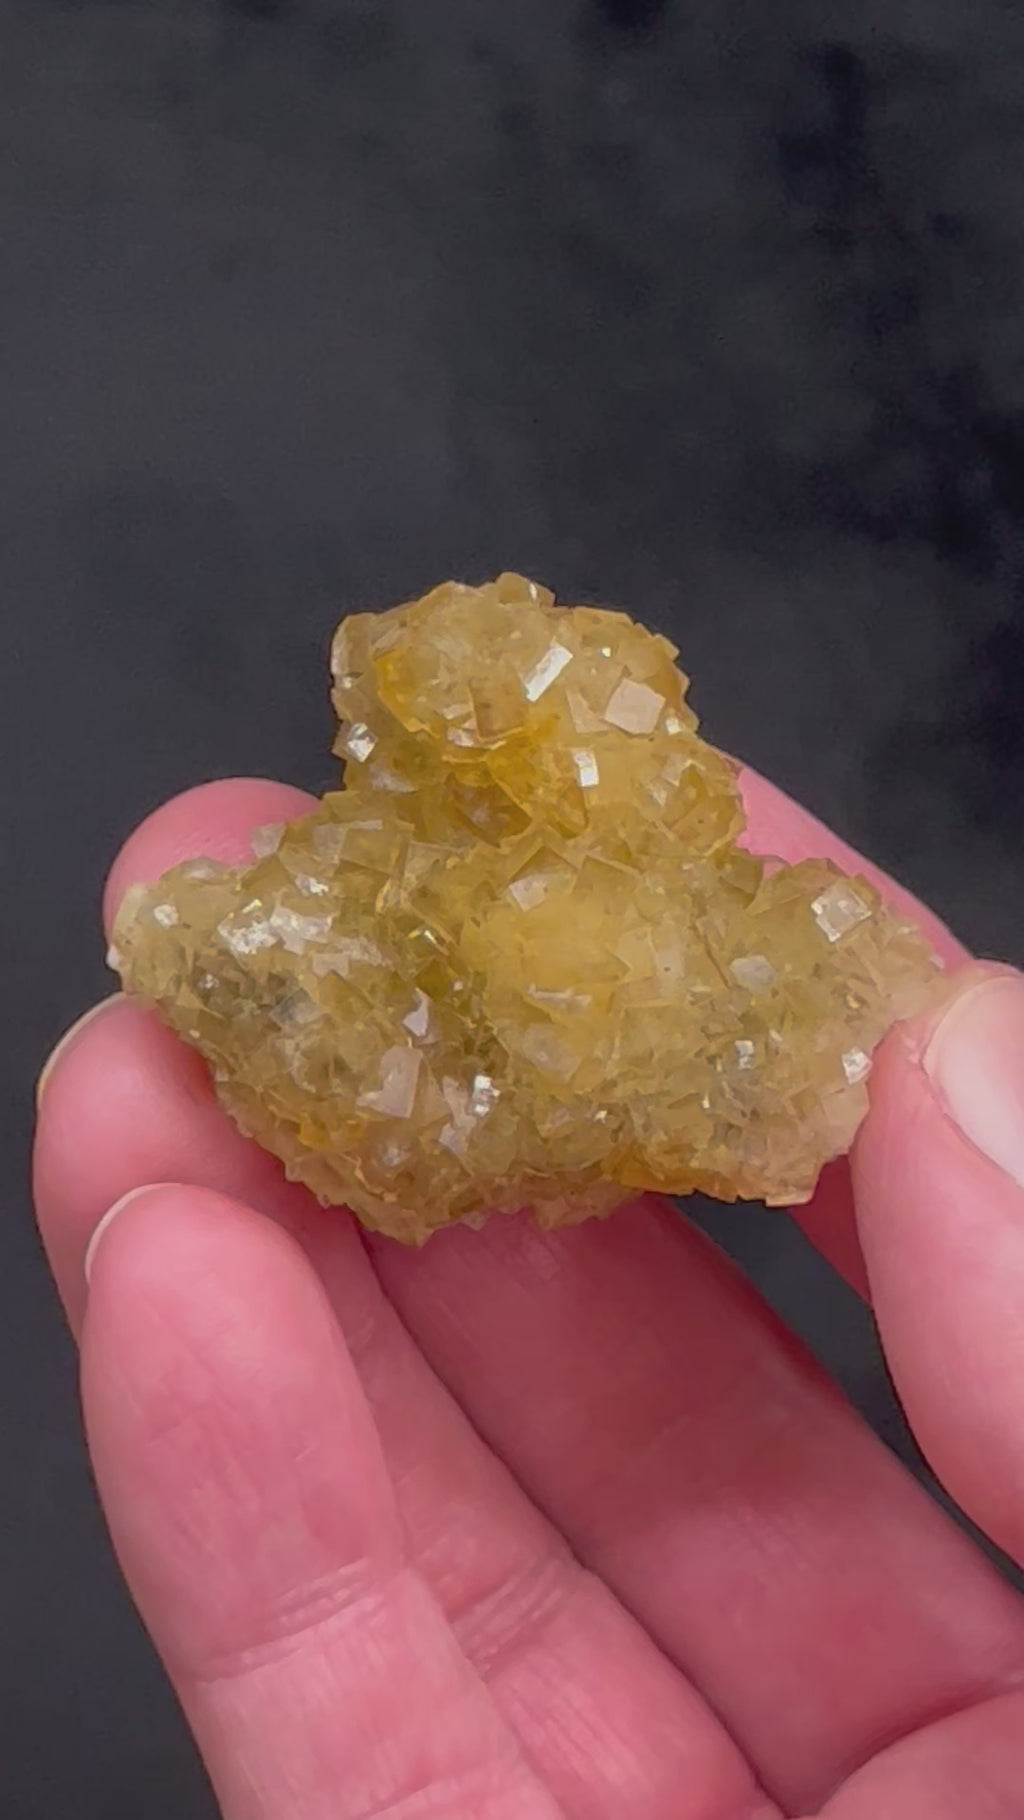 This is an excellent example of yellow Fluorite with bright white Dolomite exhibiting terrific luster and sparkle from the Moscona Mine, El Ponton de Solis, Corvera de Asturias, Asturias, Spain.